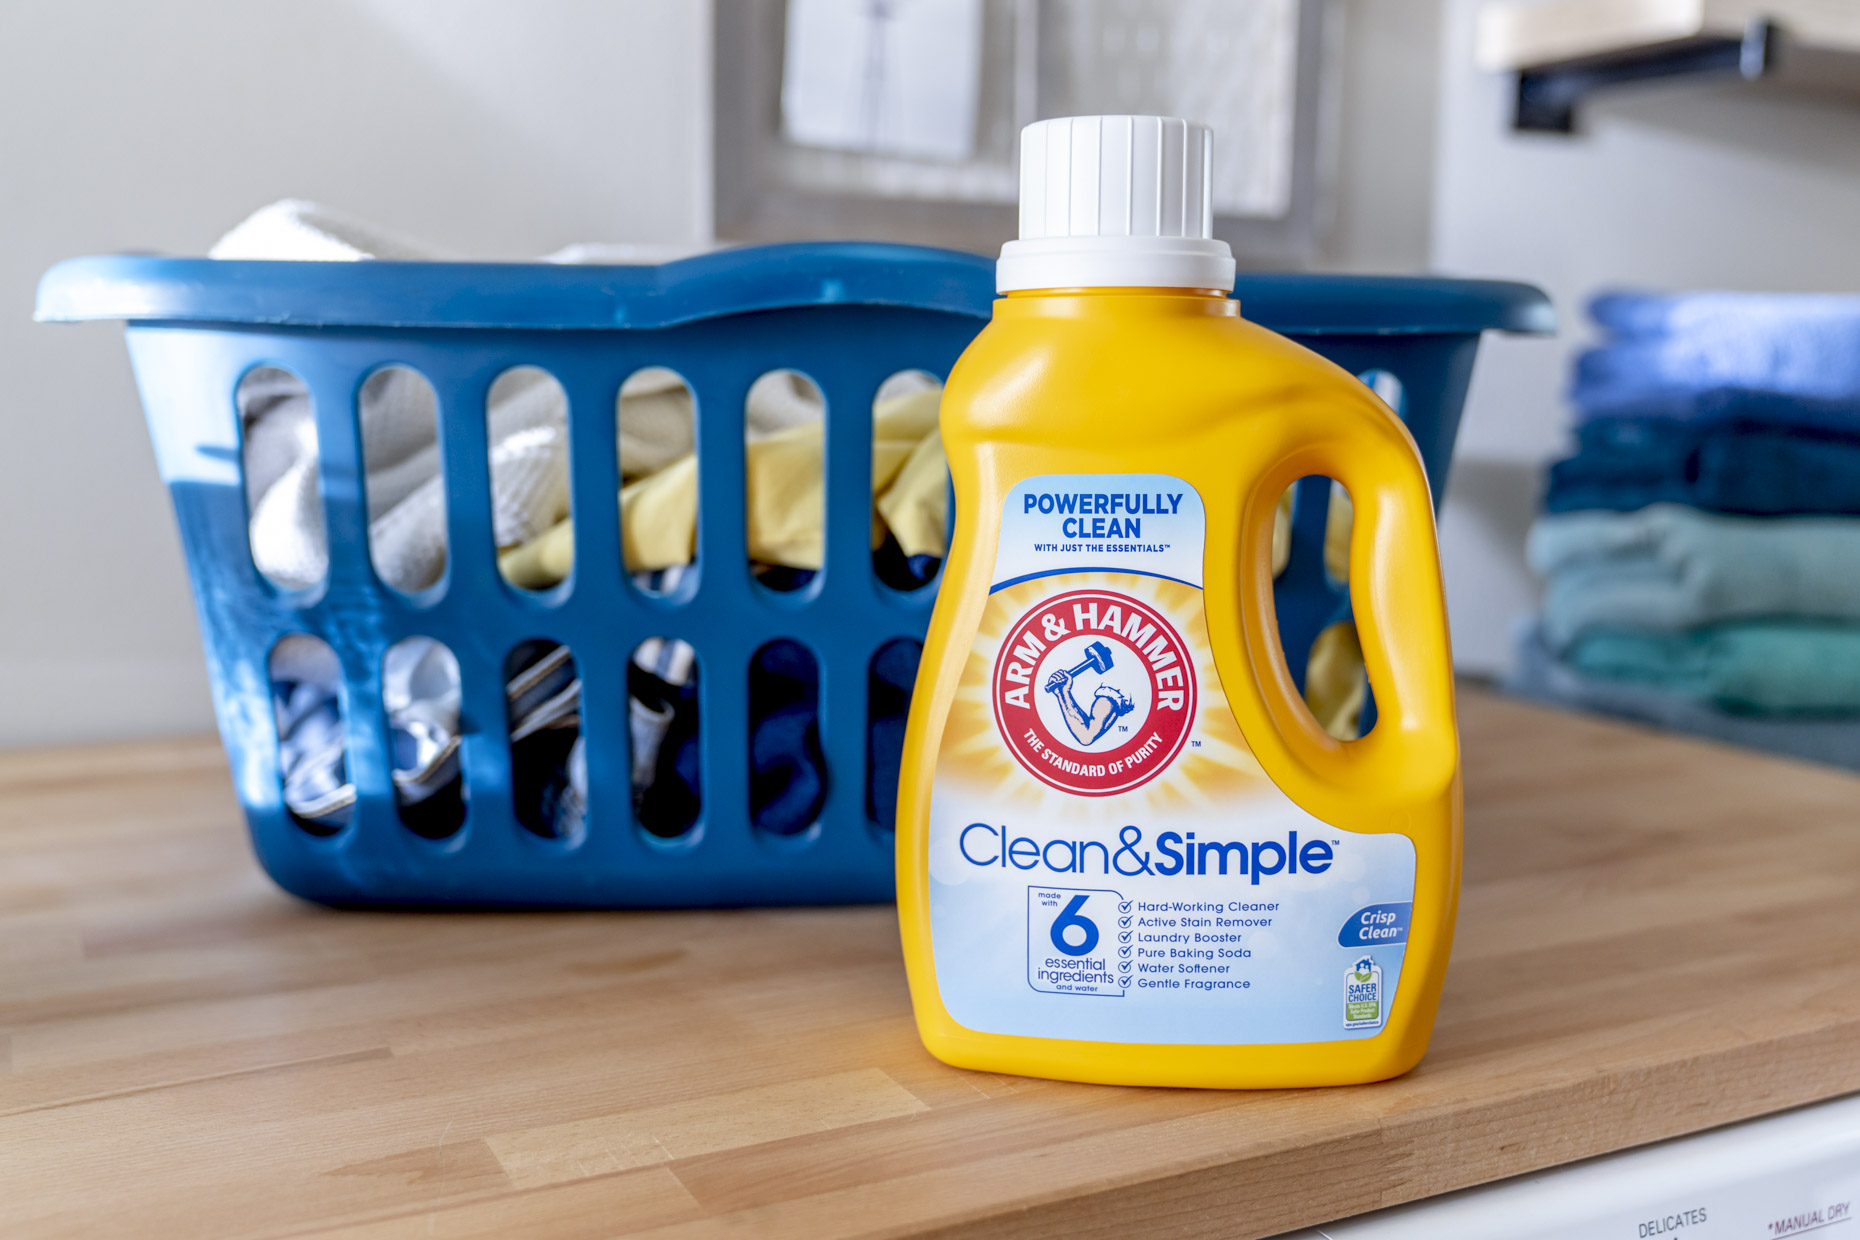 Bottle of Arm and Hammer detergent sitting on counter in front of laundry basket